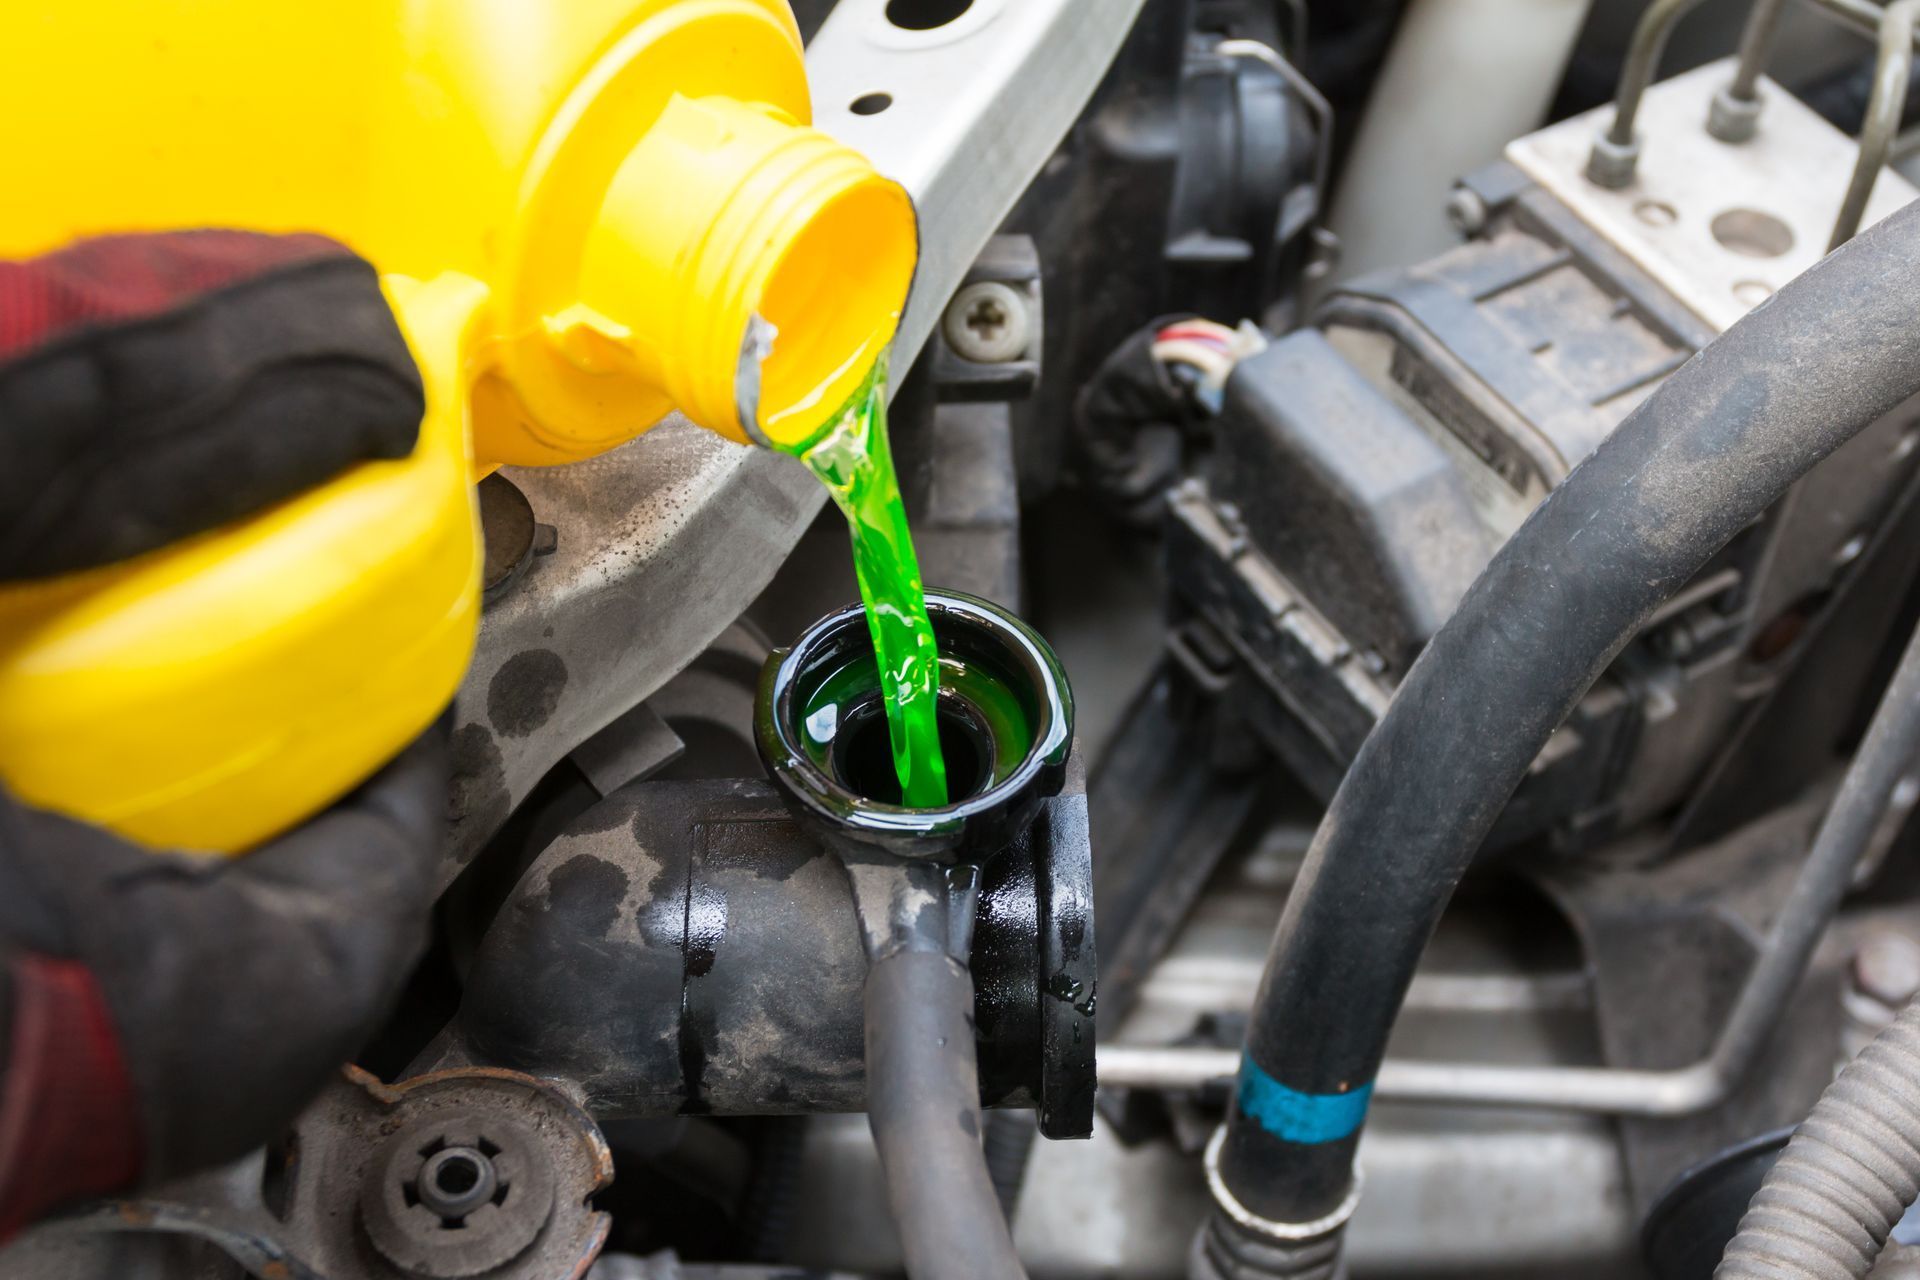 Coolant & Antifreeze at ﻿808 Automotive Inc.﻿ in ﻿Hubbard, OR﻿